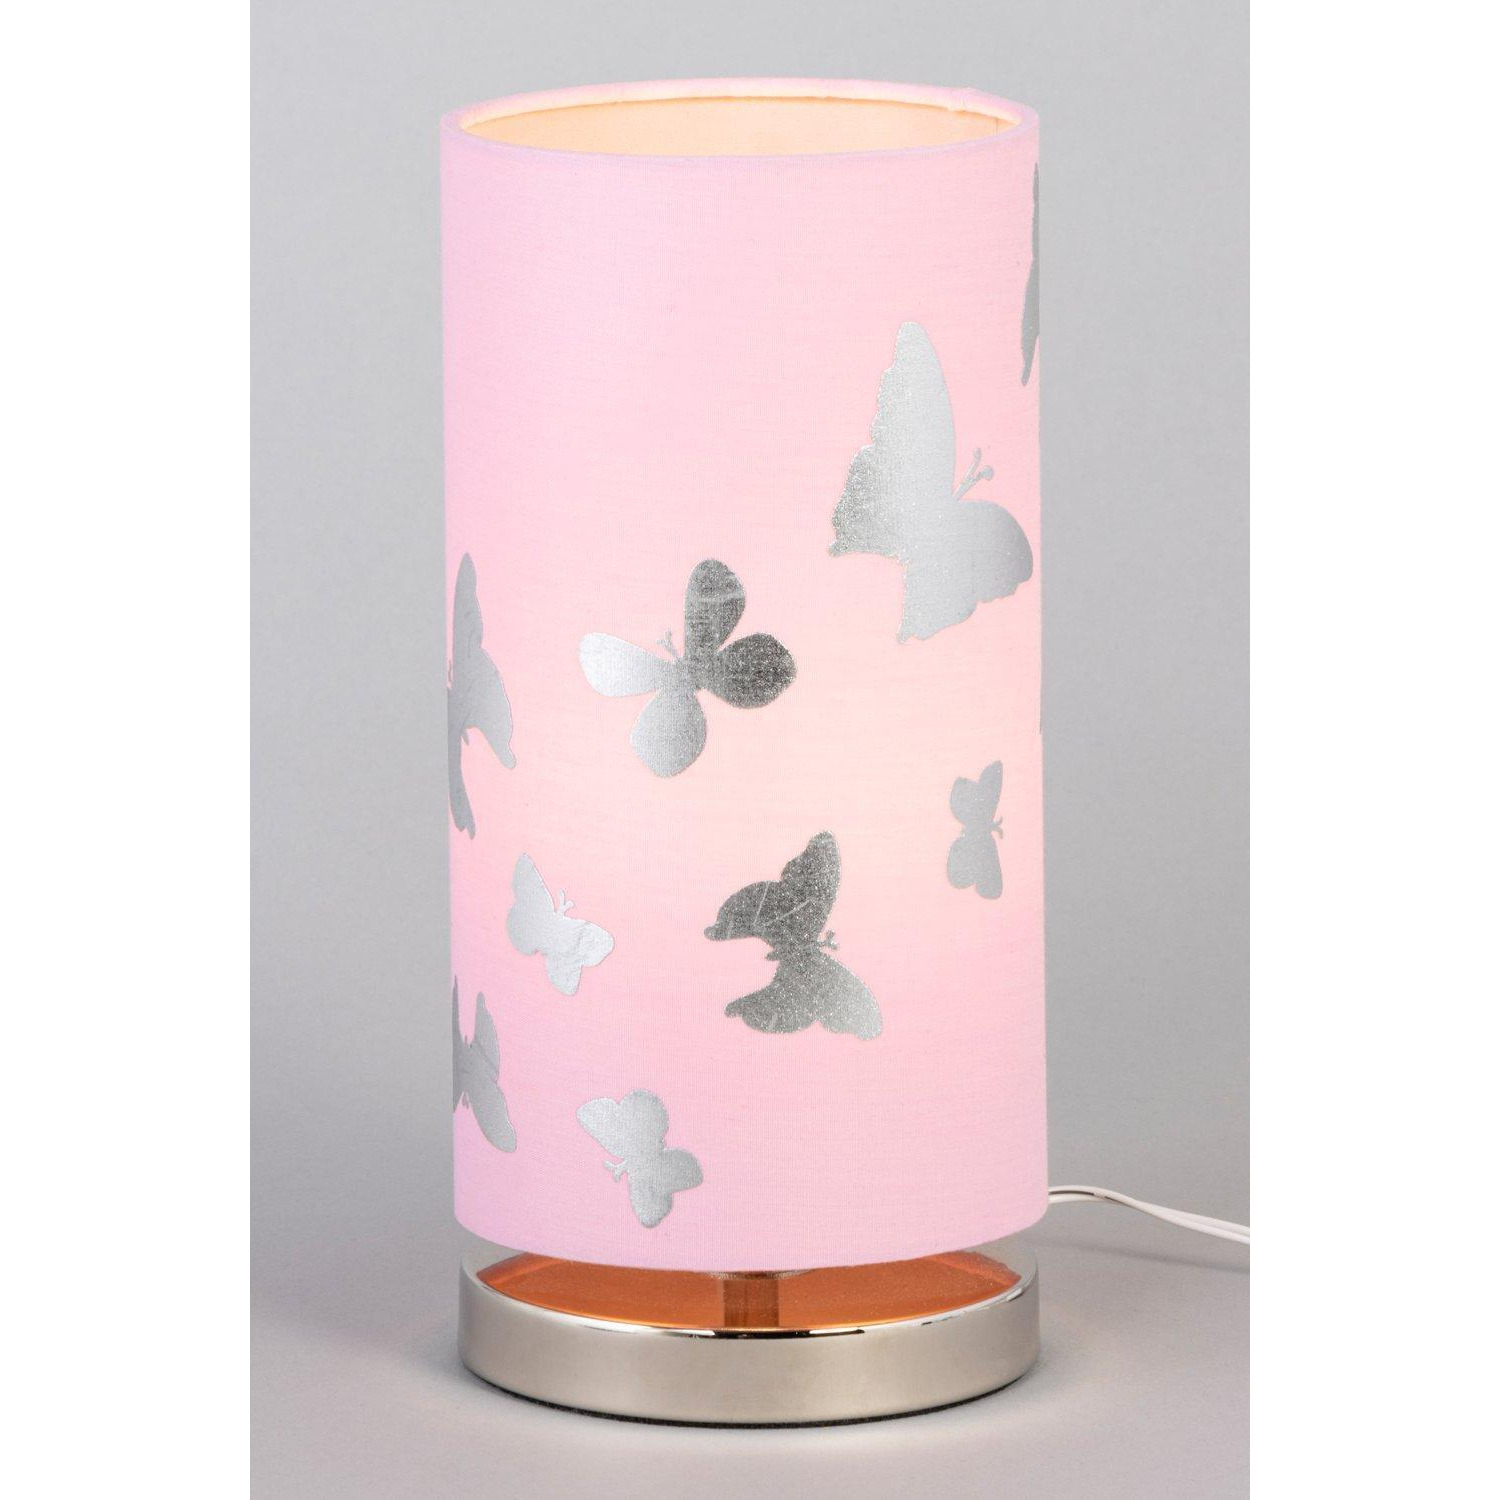 Glow Butterly Table Lamp - image 1